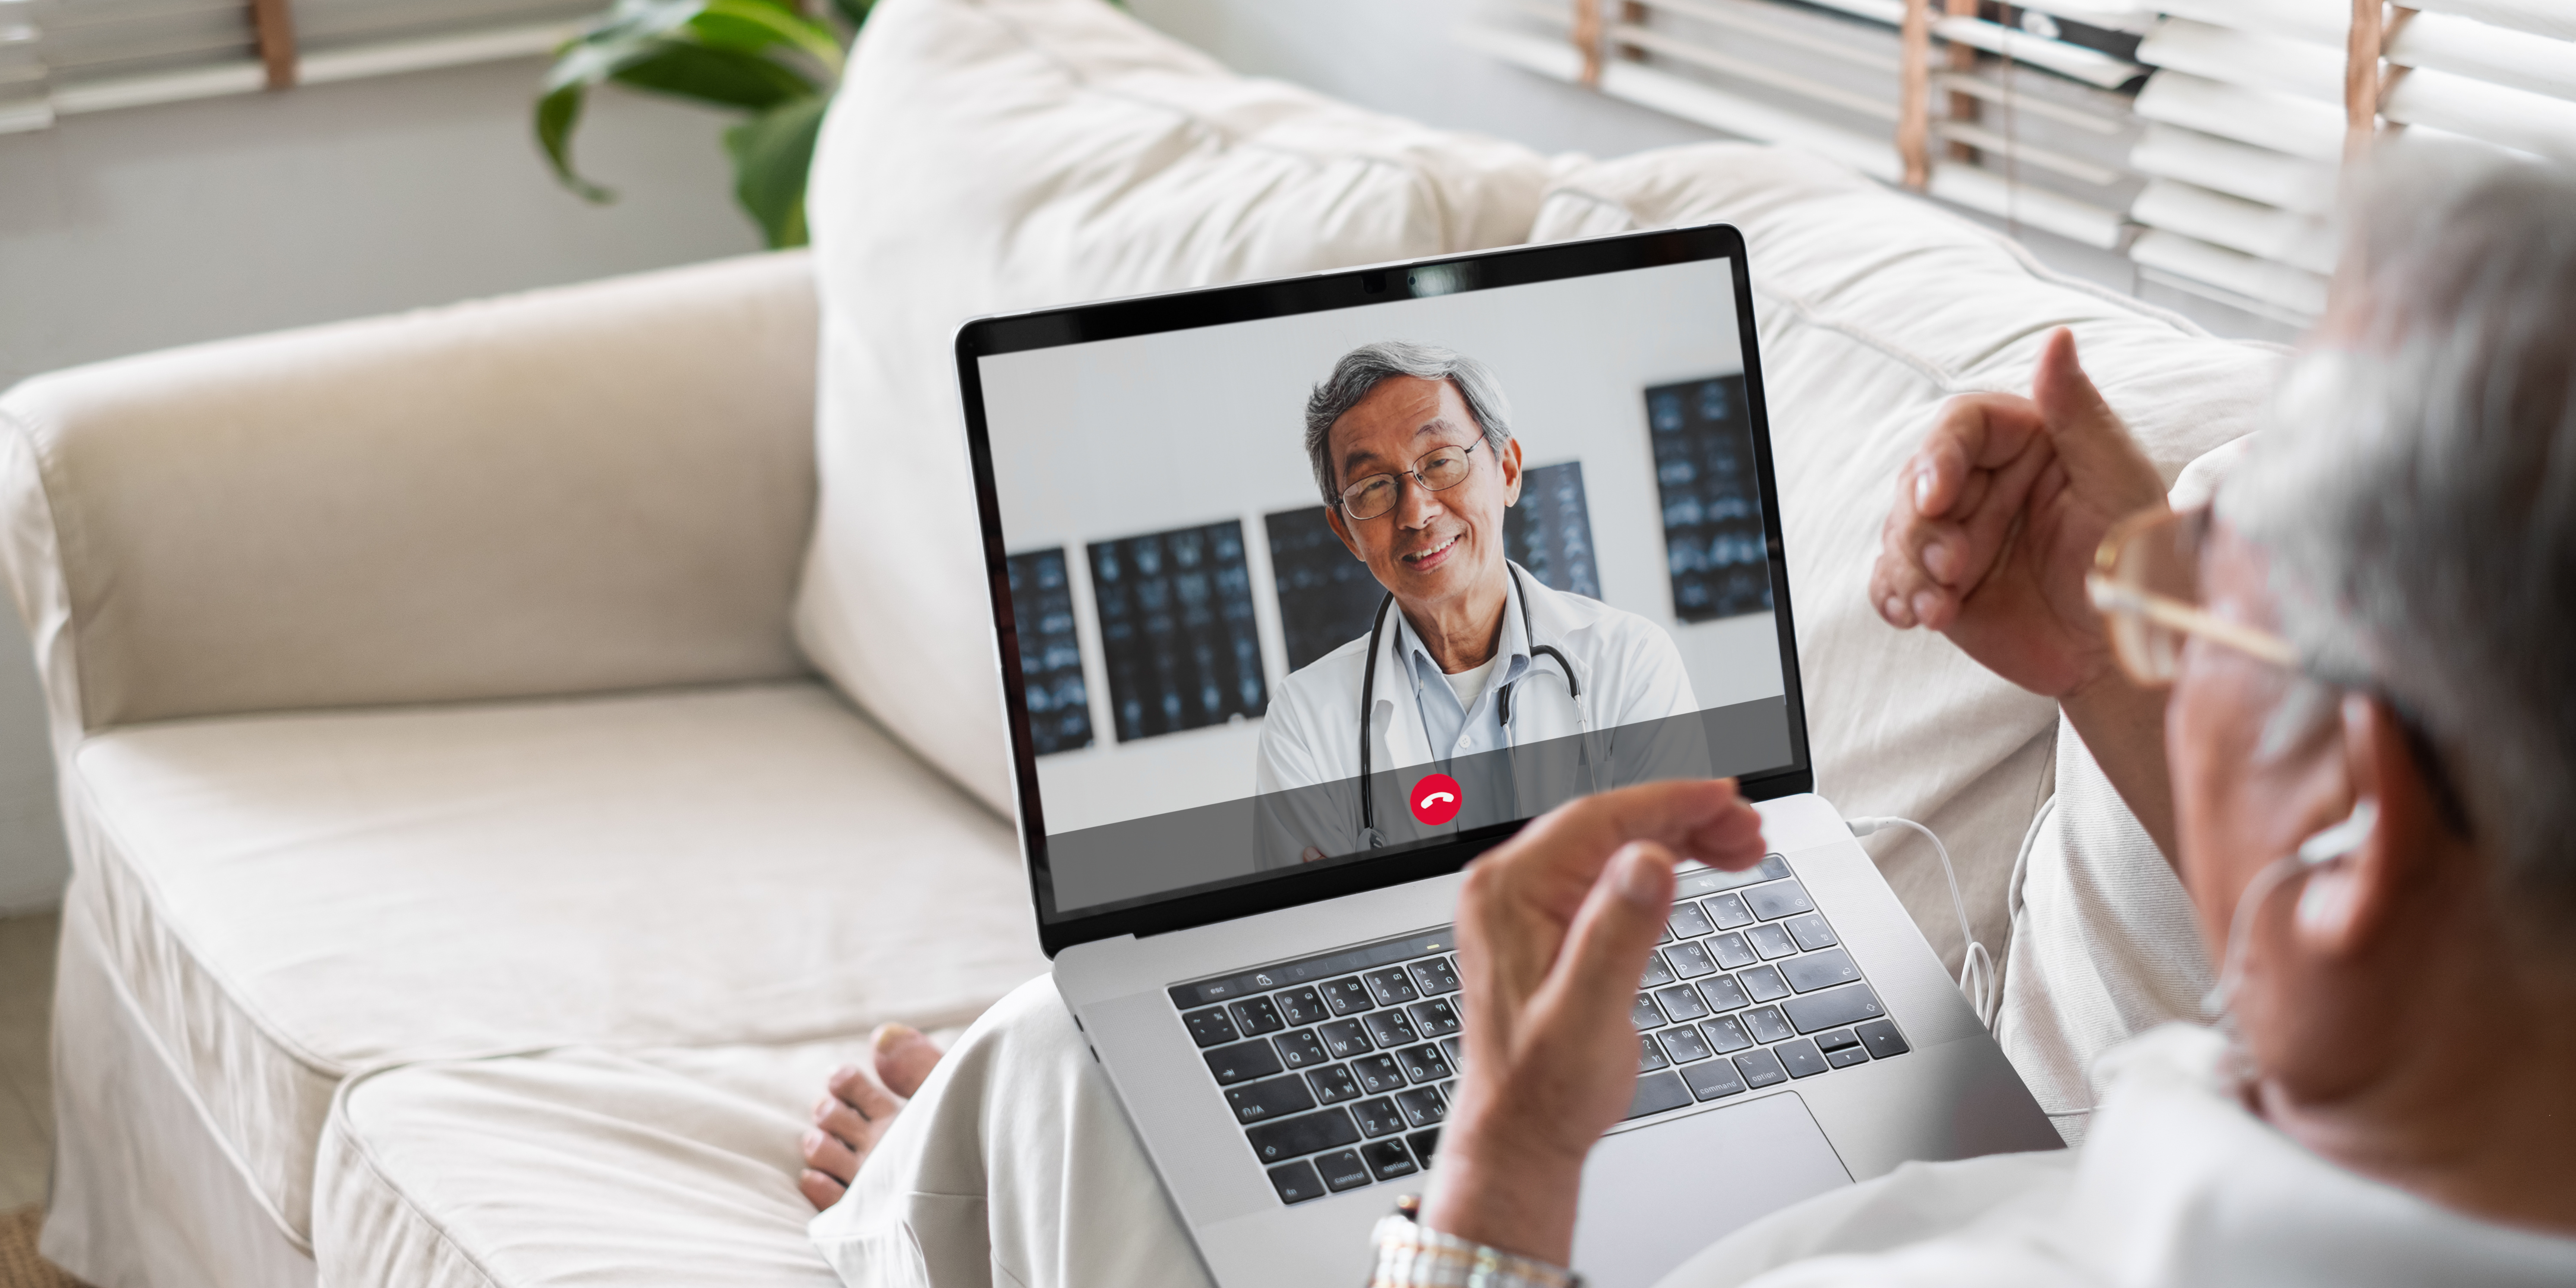 Man on couch speaking with doctor on telehealth call